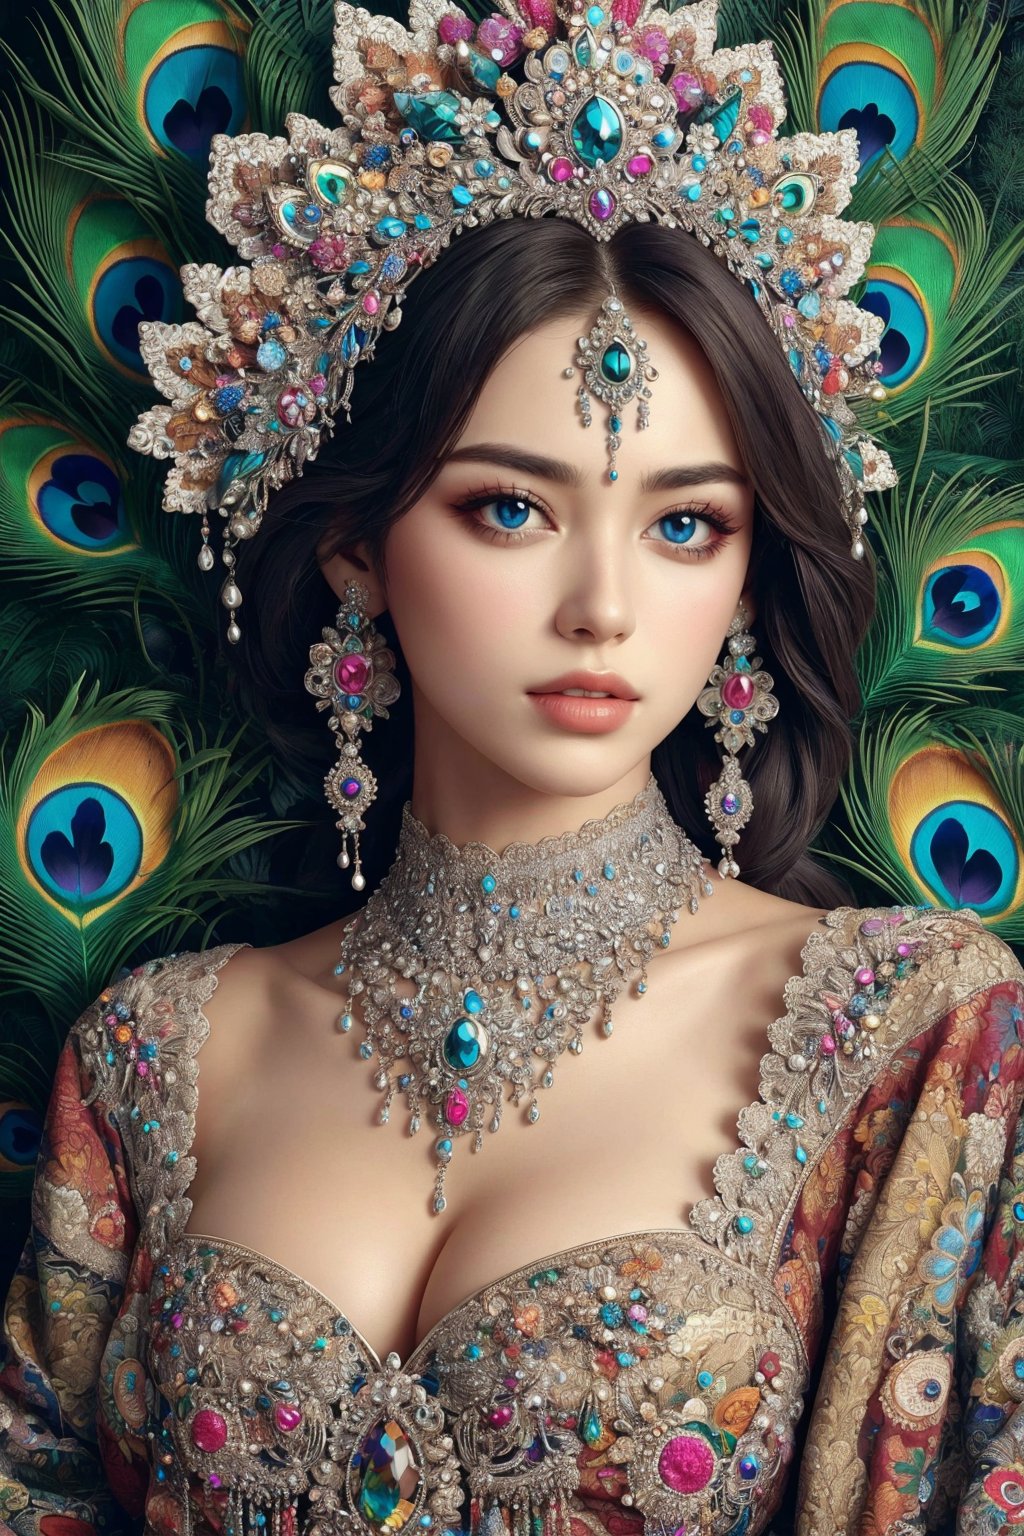 busty and sexy girl, 8k, masterpiece, ultra-realistic, best quality, high resolution, high definition, Peacock feather, hair ornament, jewelry, earrings, necklace, headdress, gem, pearl, peacock feather, colorful, intricate details